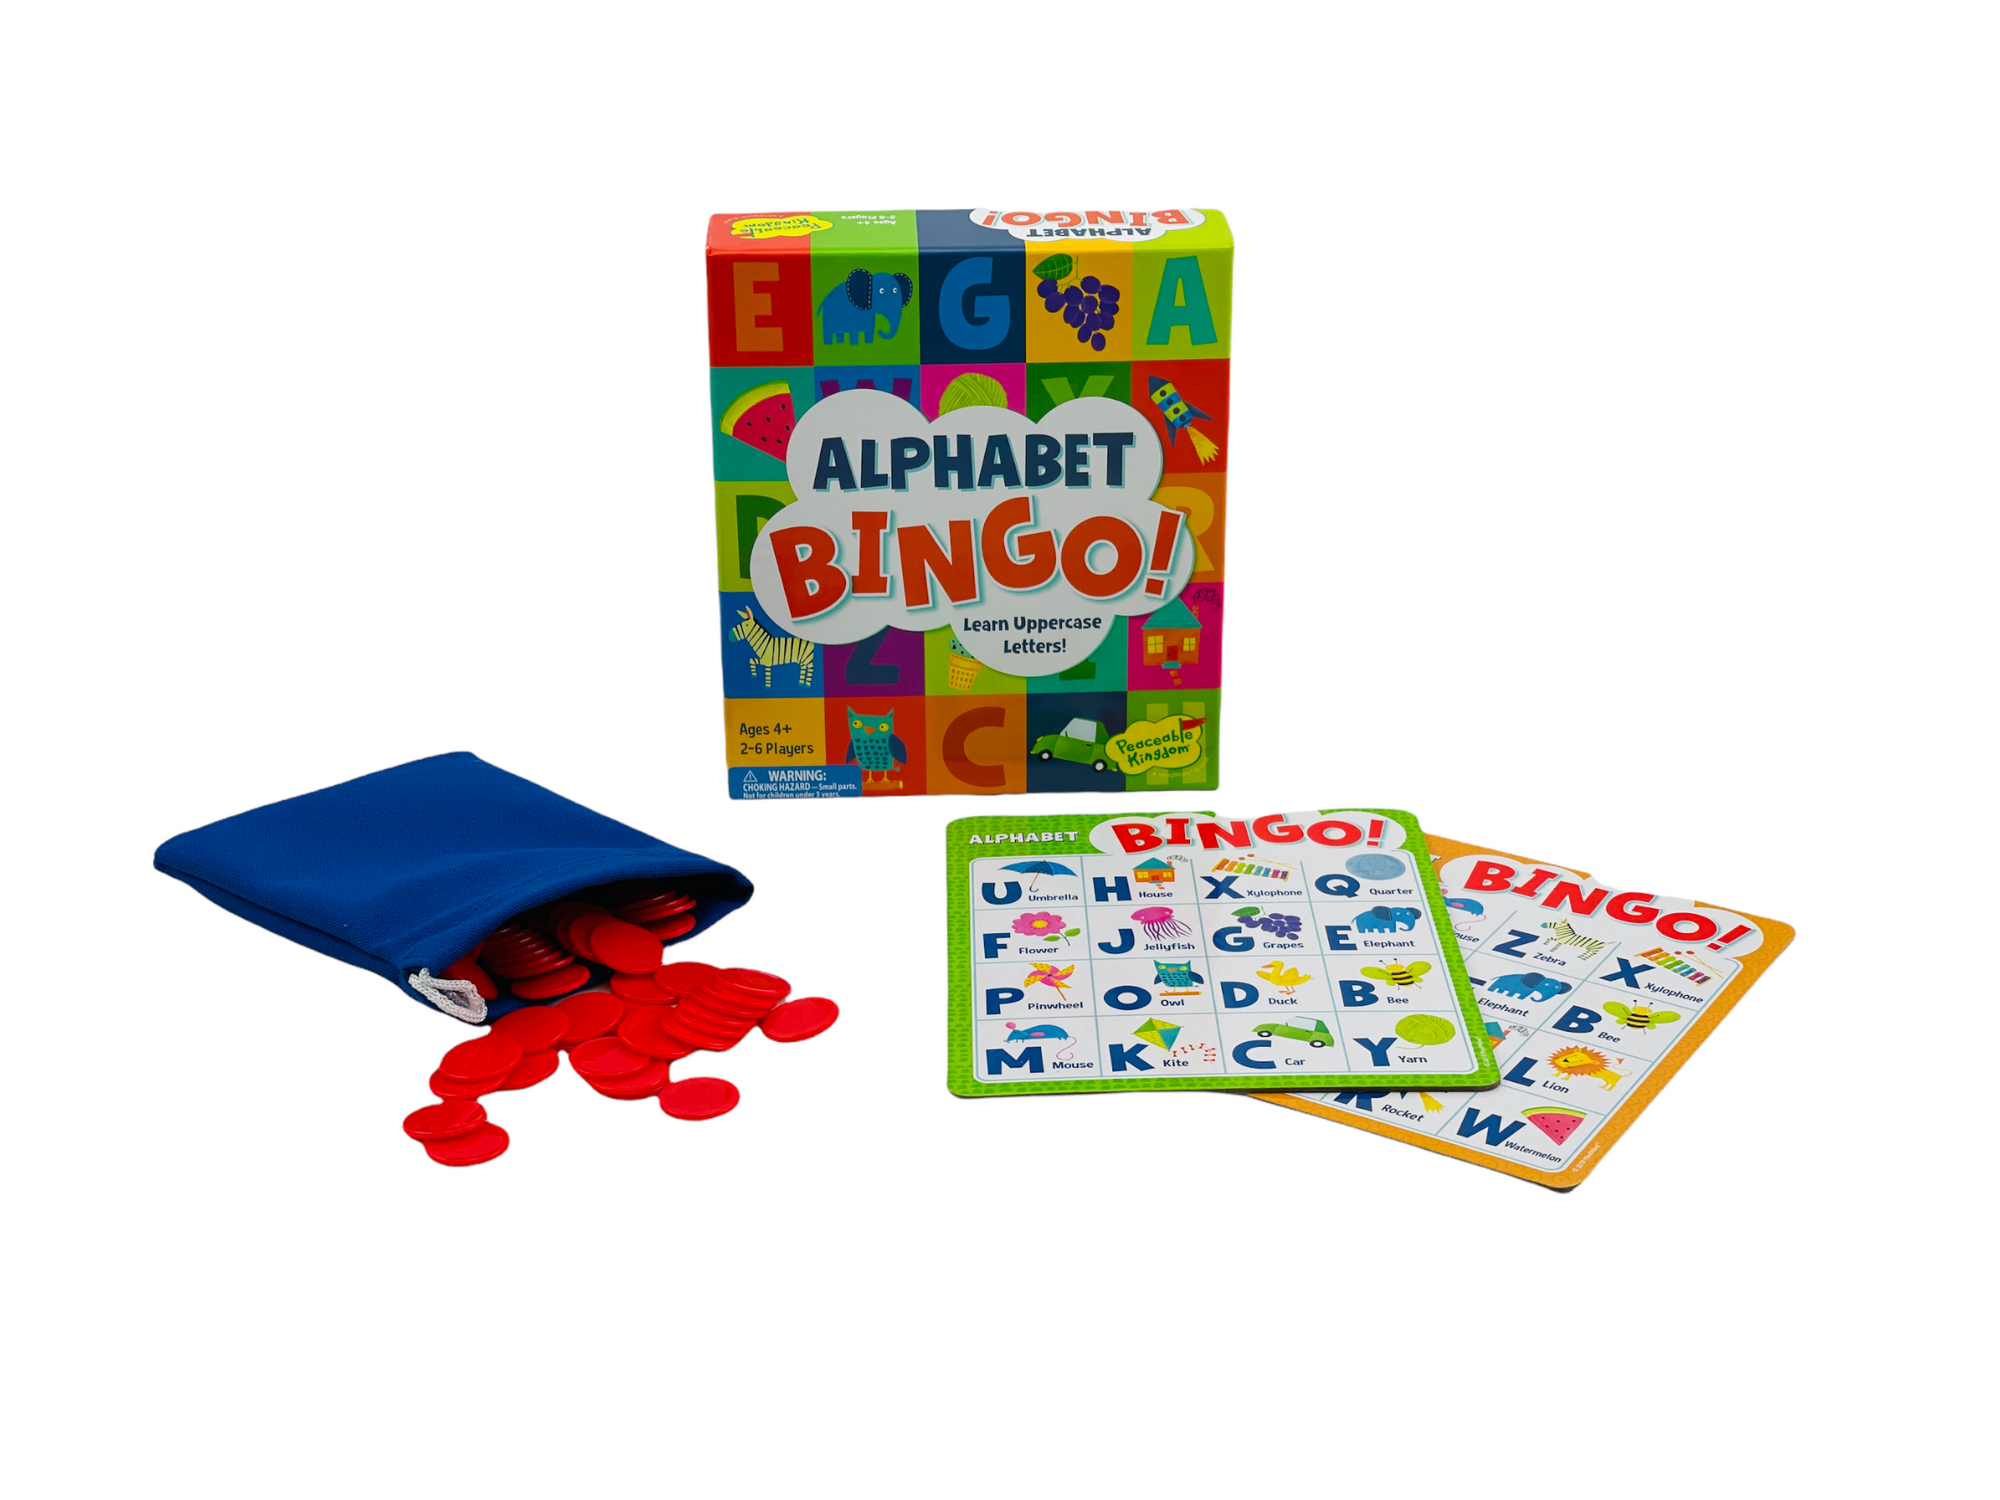 Peaceable Kingdom Alphabet Bingo with bingo playing boards laid next to red counters and packaging box on white background